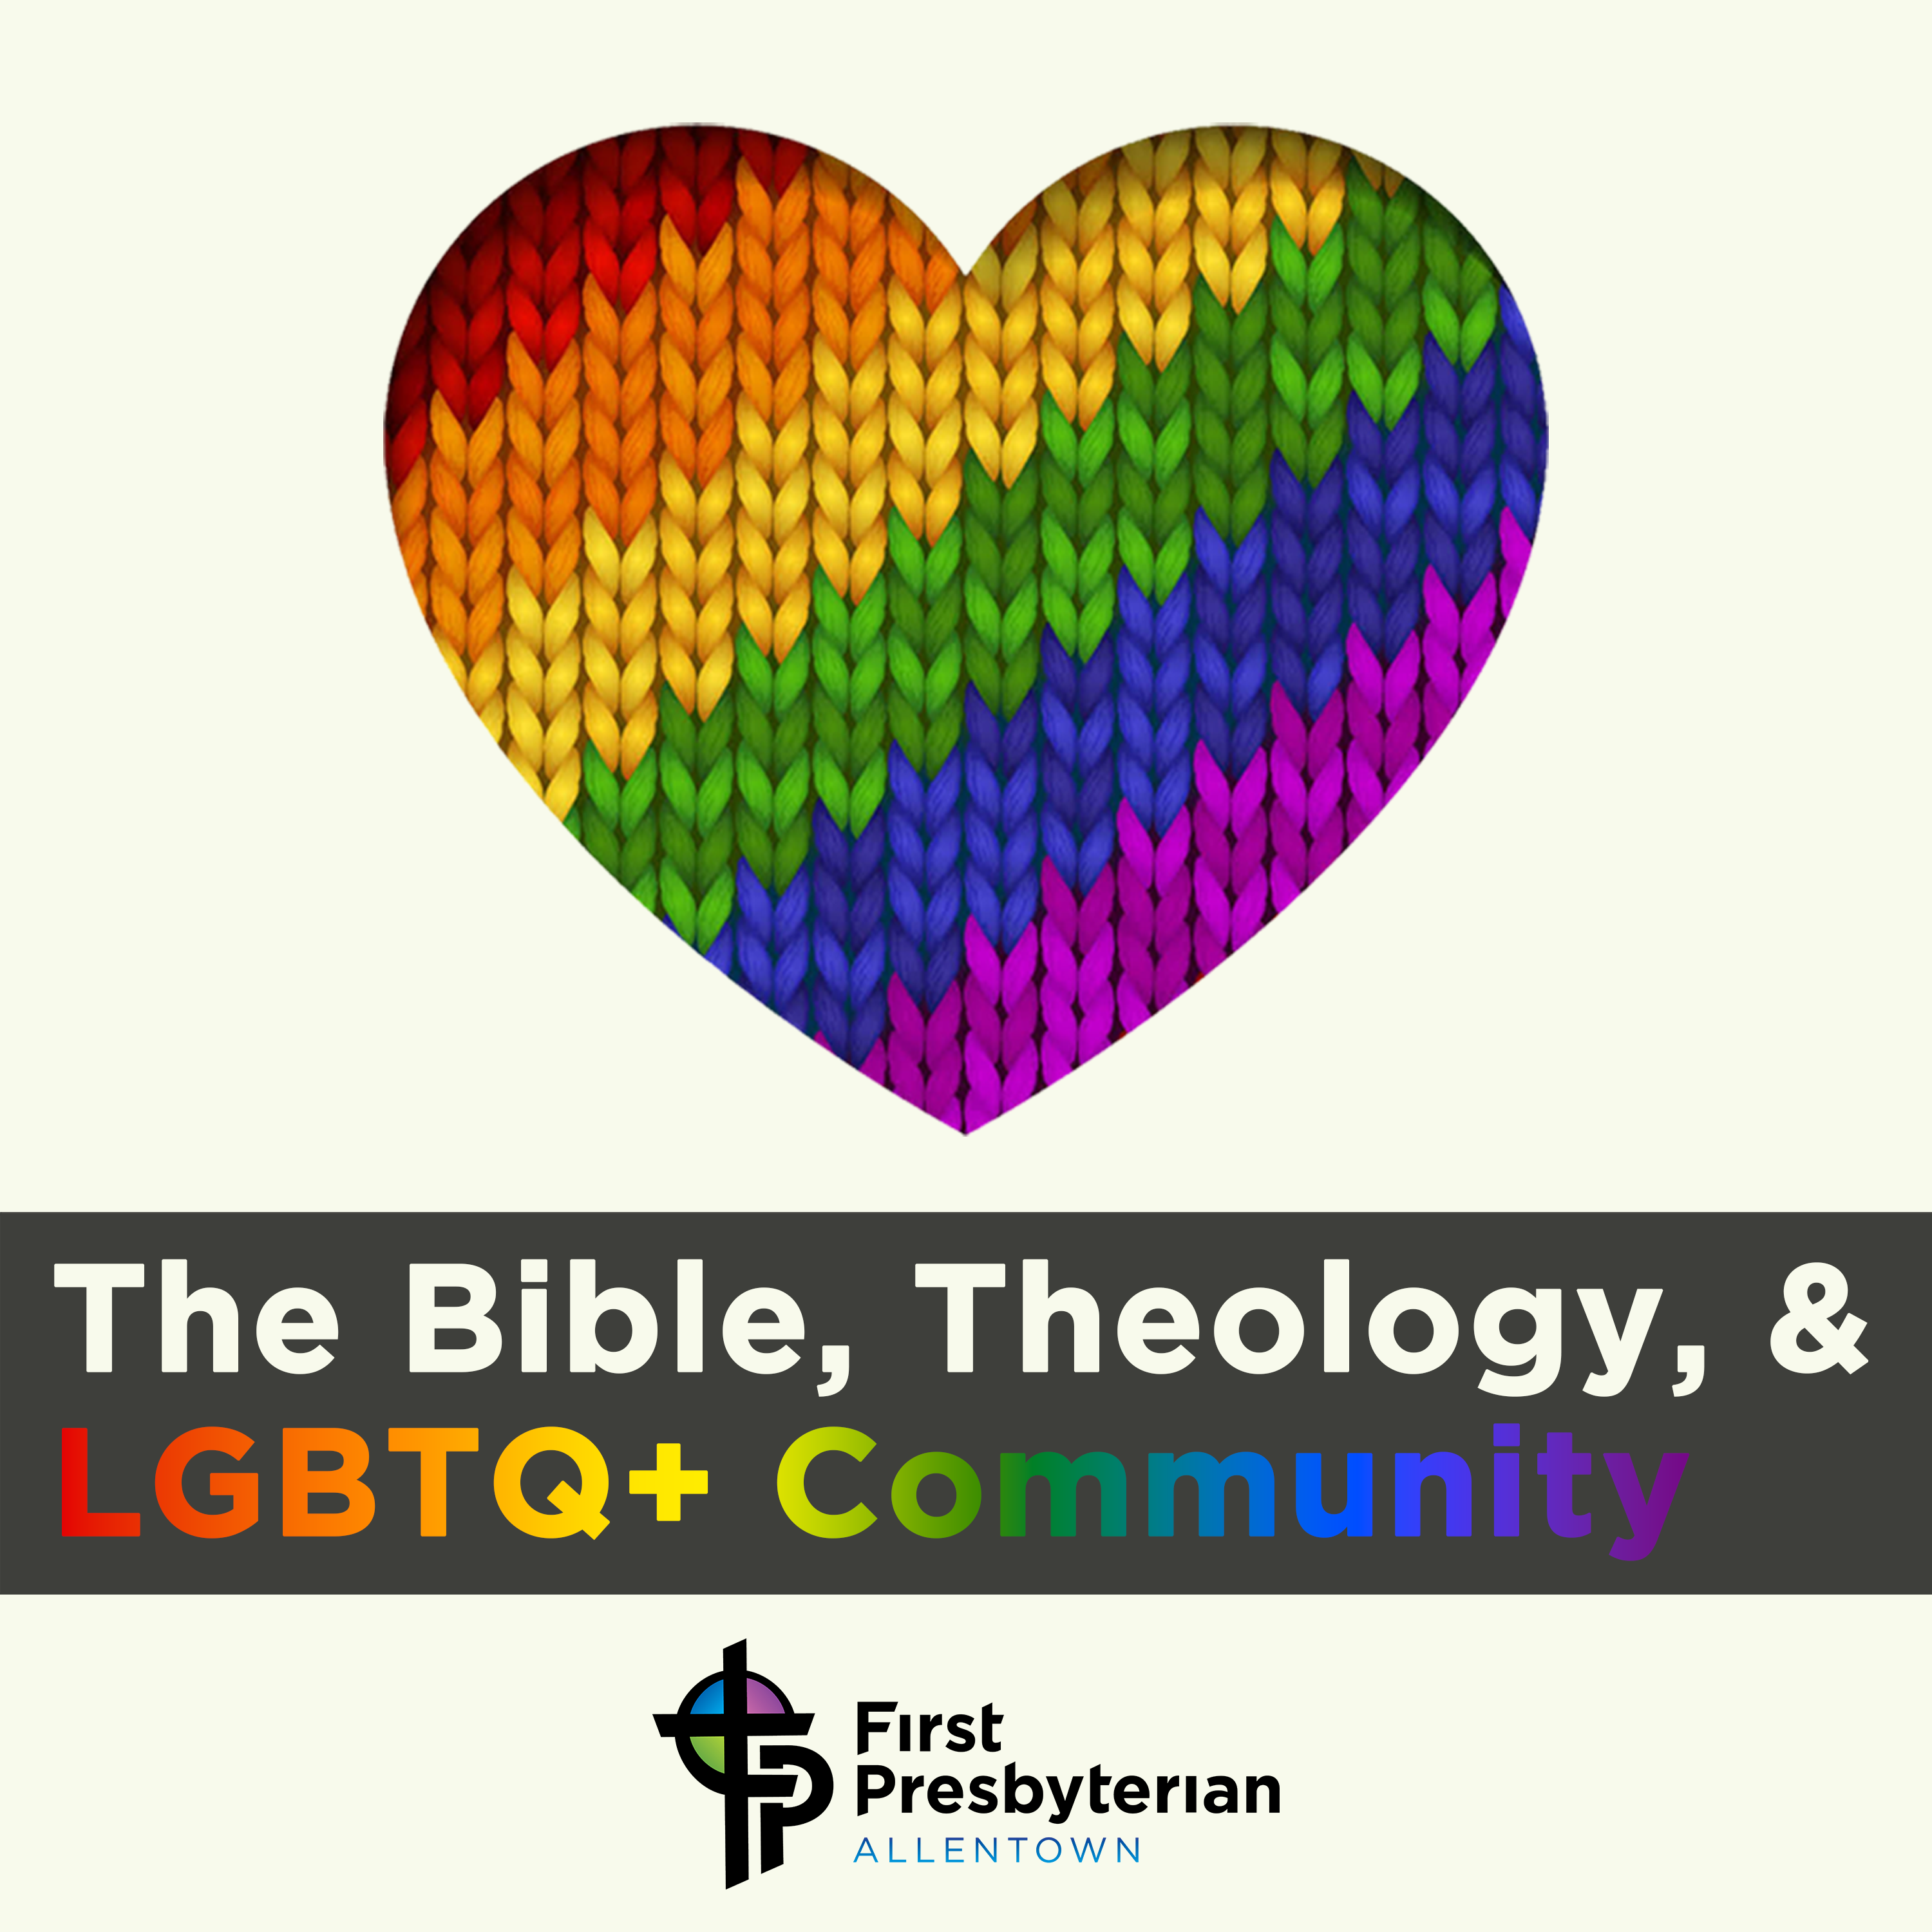 The Bible, Theology, & LGBTQ+ Community - FPC Allentown